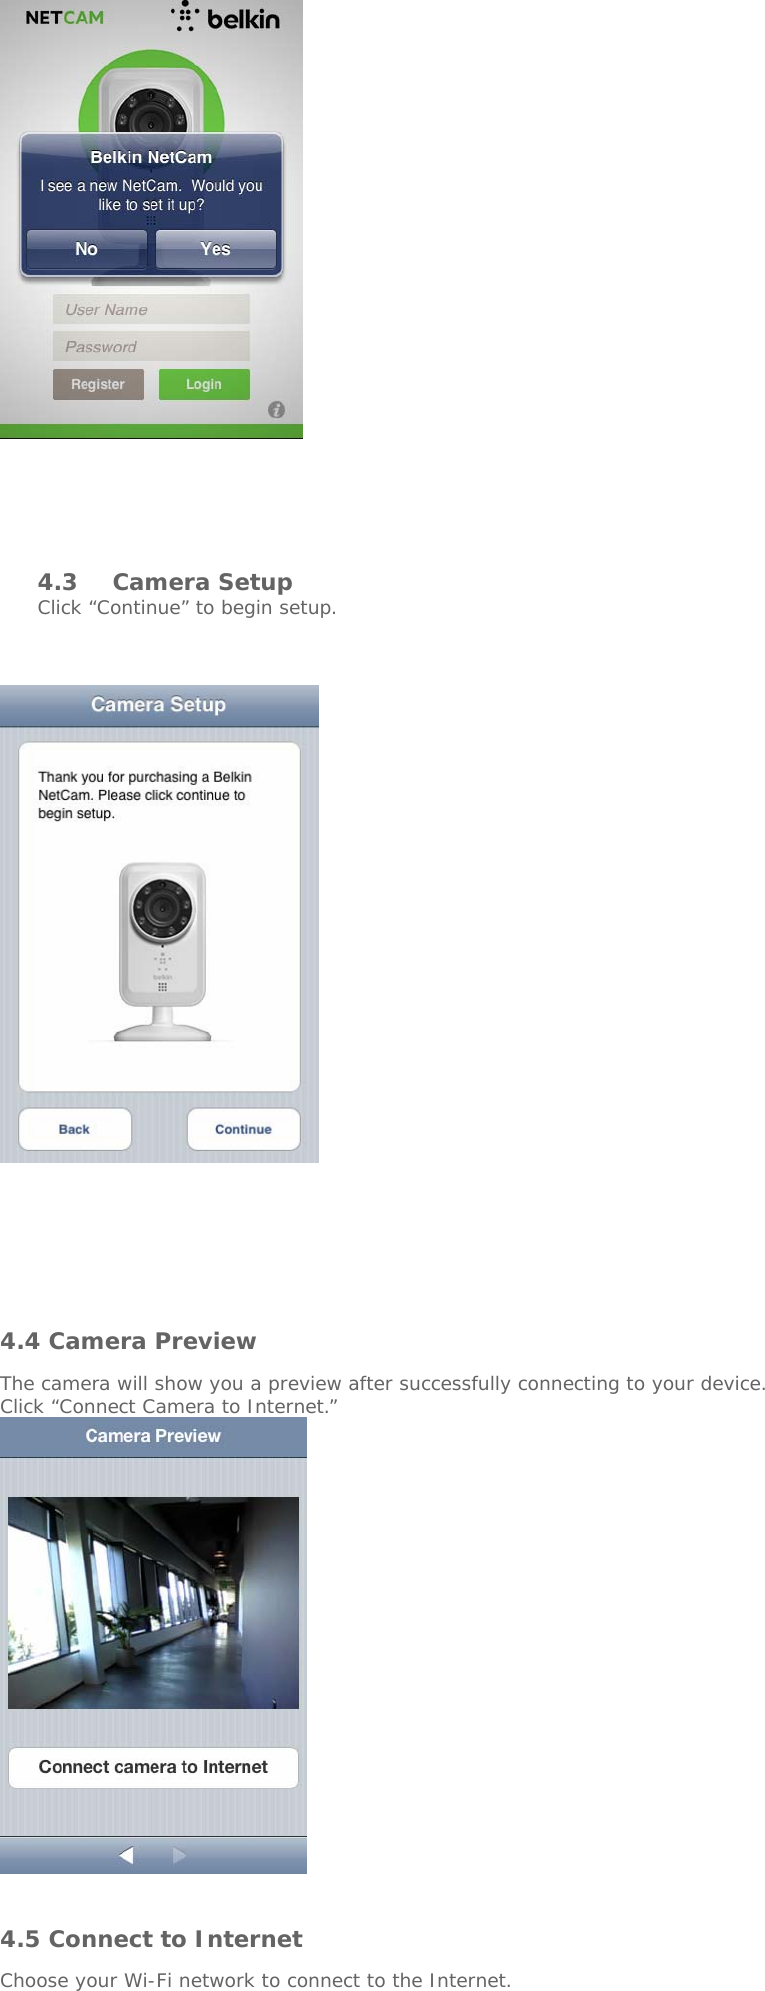          4.3 Camera Setup Click “Continue” to begin setup.             4.4 Camera Preview  The camera will show you a preview after successfully connecting to your device.   Click “Connect Camera to Internet.”      4.5 Connect to Internet  Choose your Wi-Fi network to connect to the Internet.     